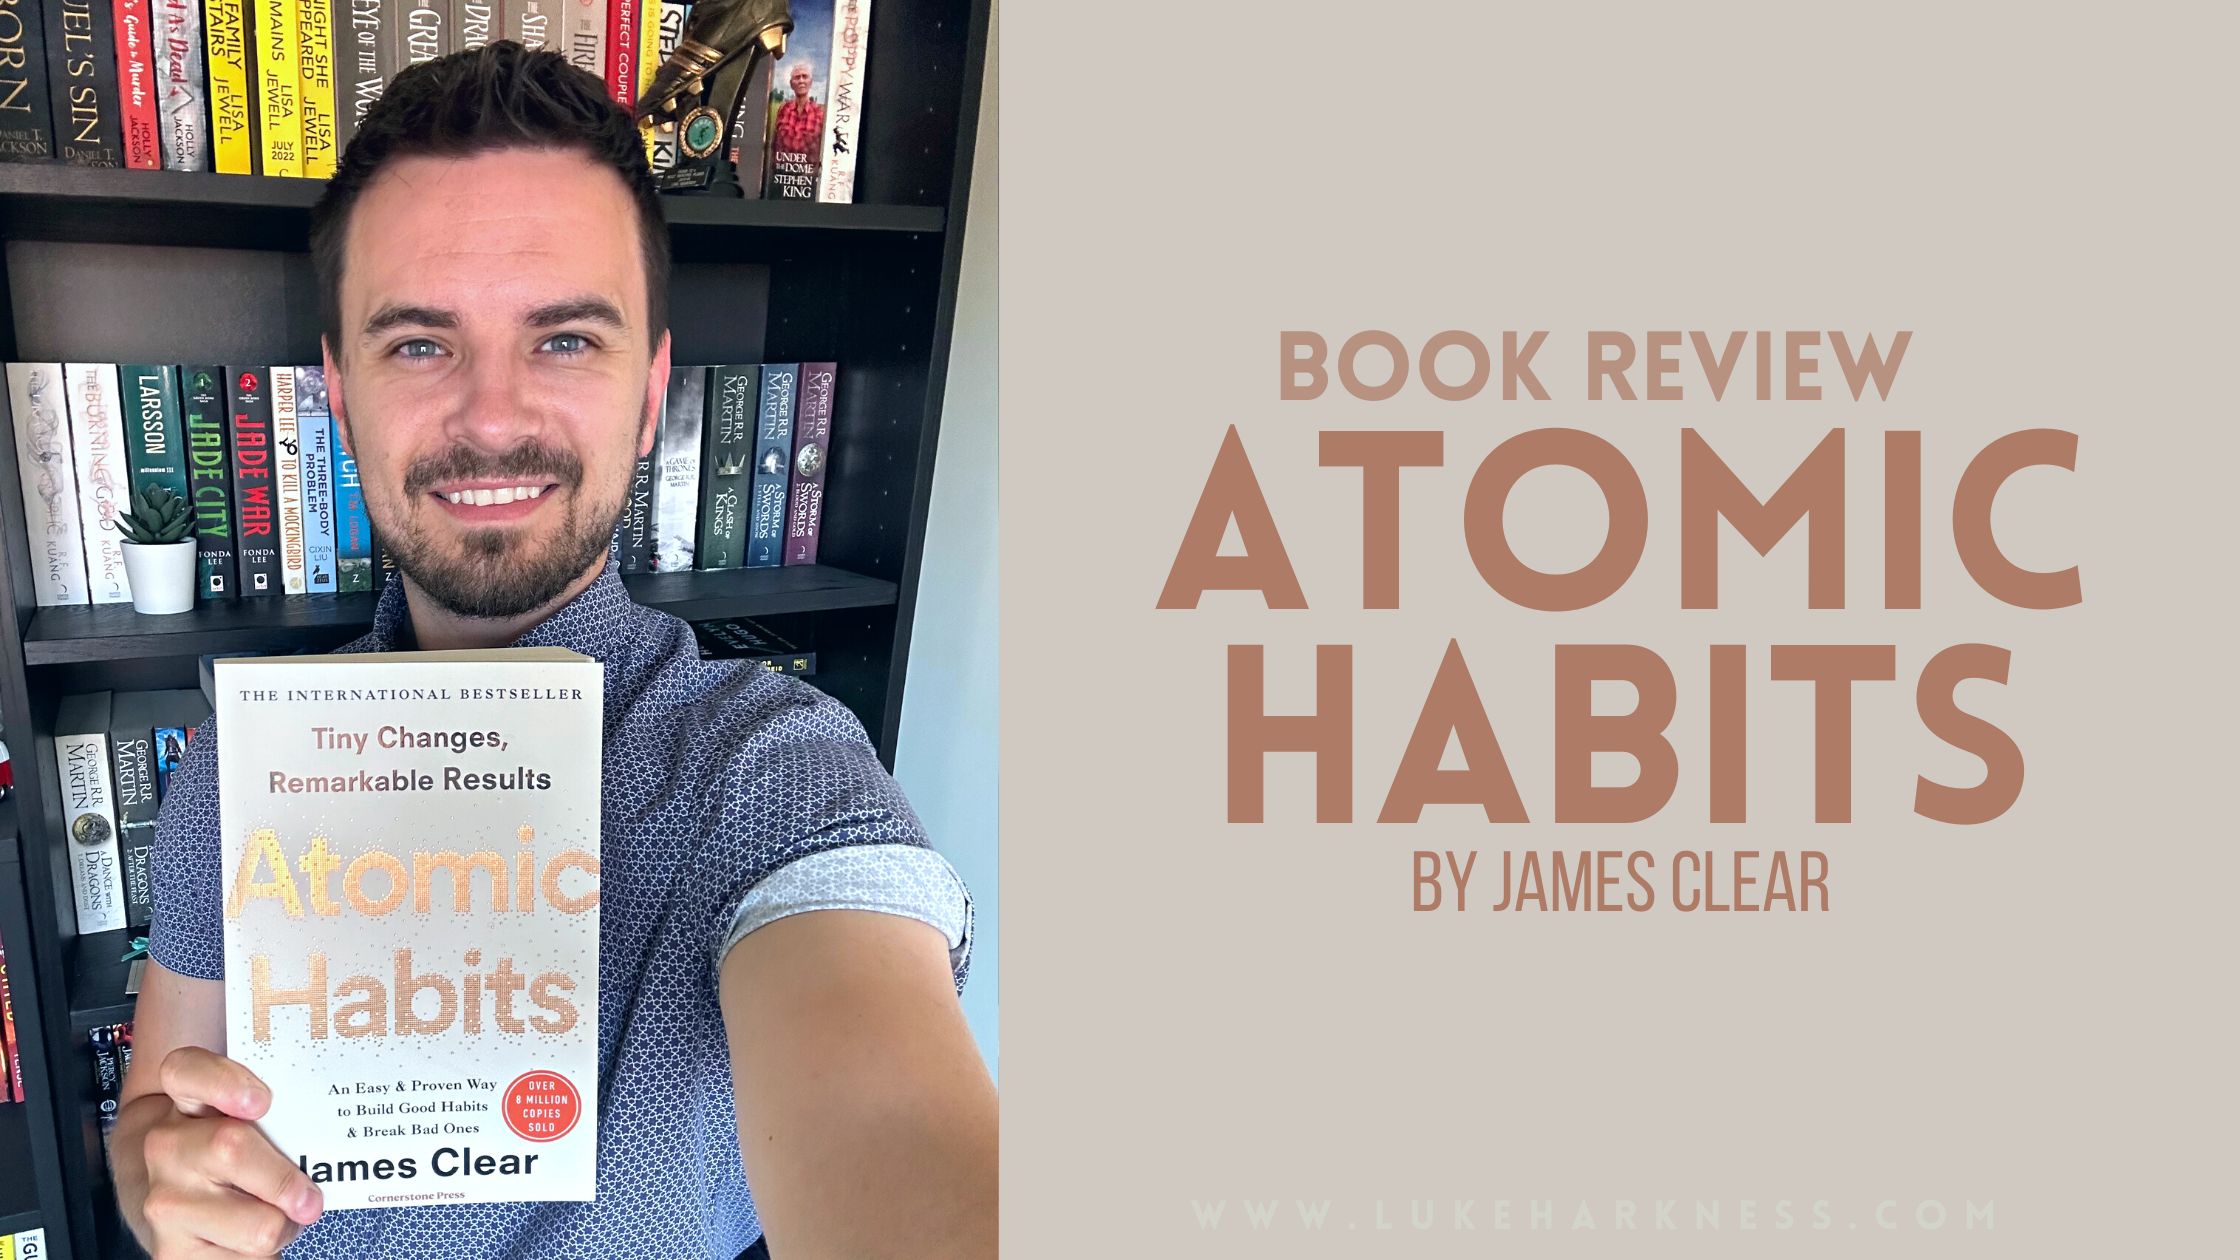 Book Summary: Atomic Habits - James Clear